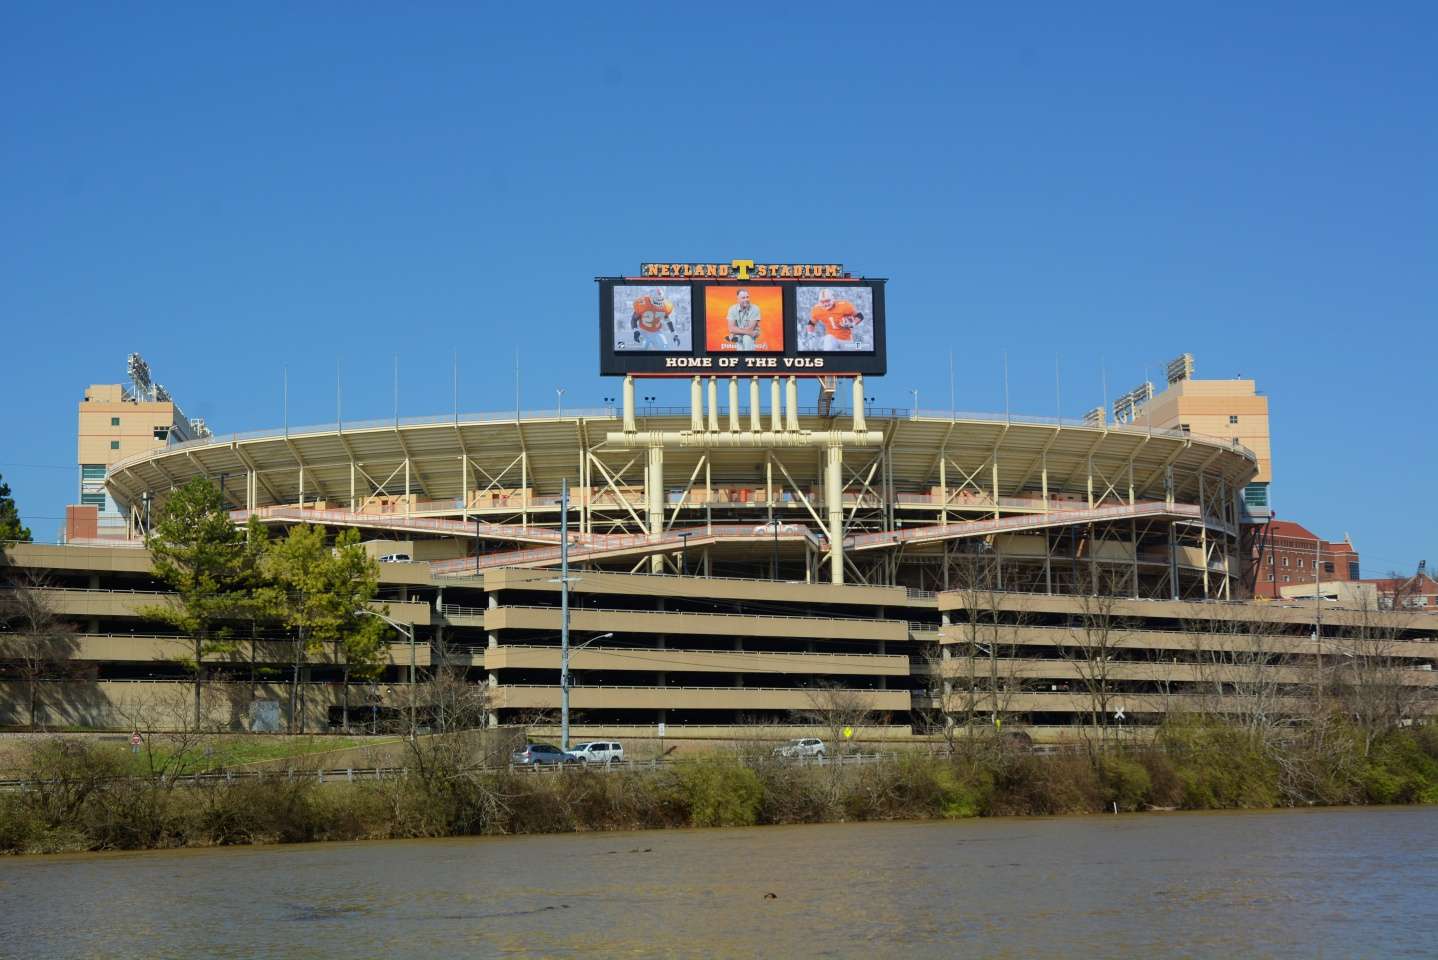 On the riverbank is Neyland Stadium, at 102,455 seats the fifth largest stadium in the nation. Shields Watkins Field, with its signature orange-and-white checkerboard patterned end zones, was originally constructed in 1921. 